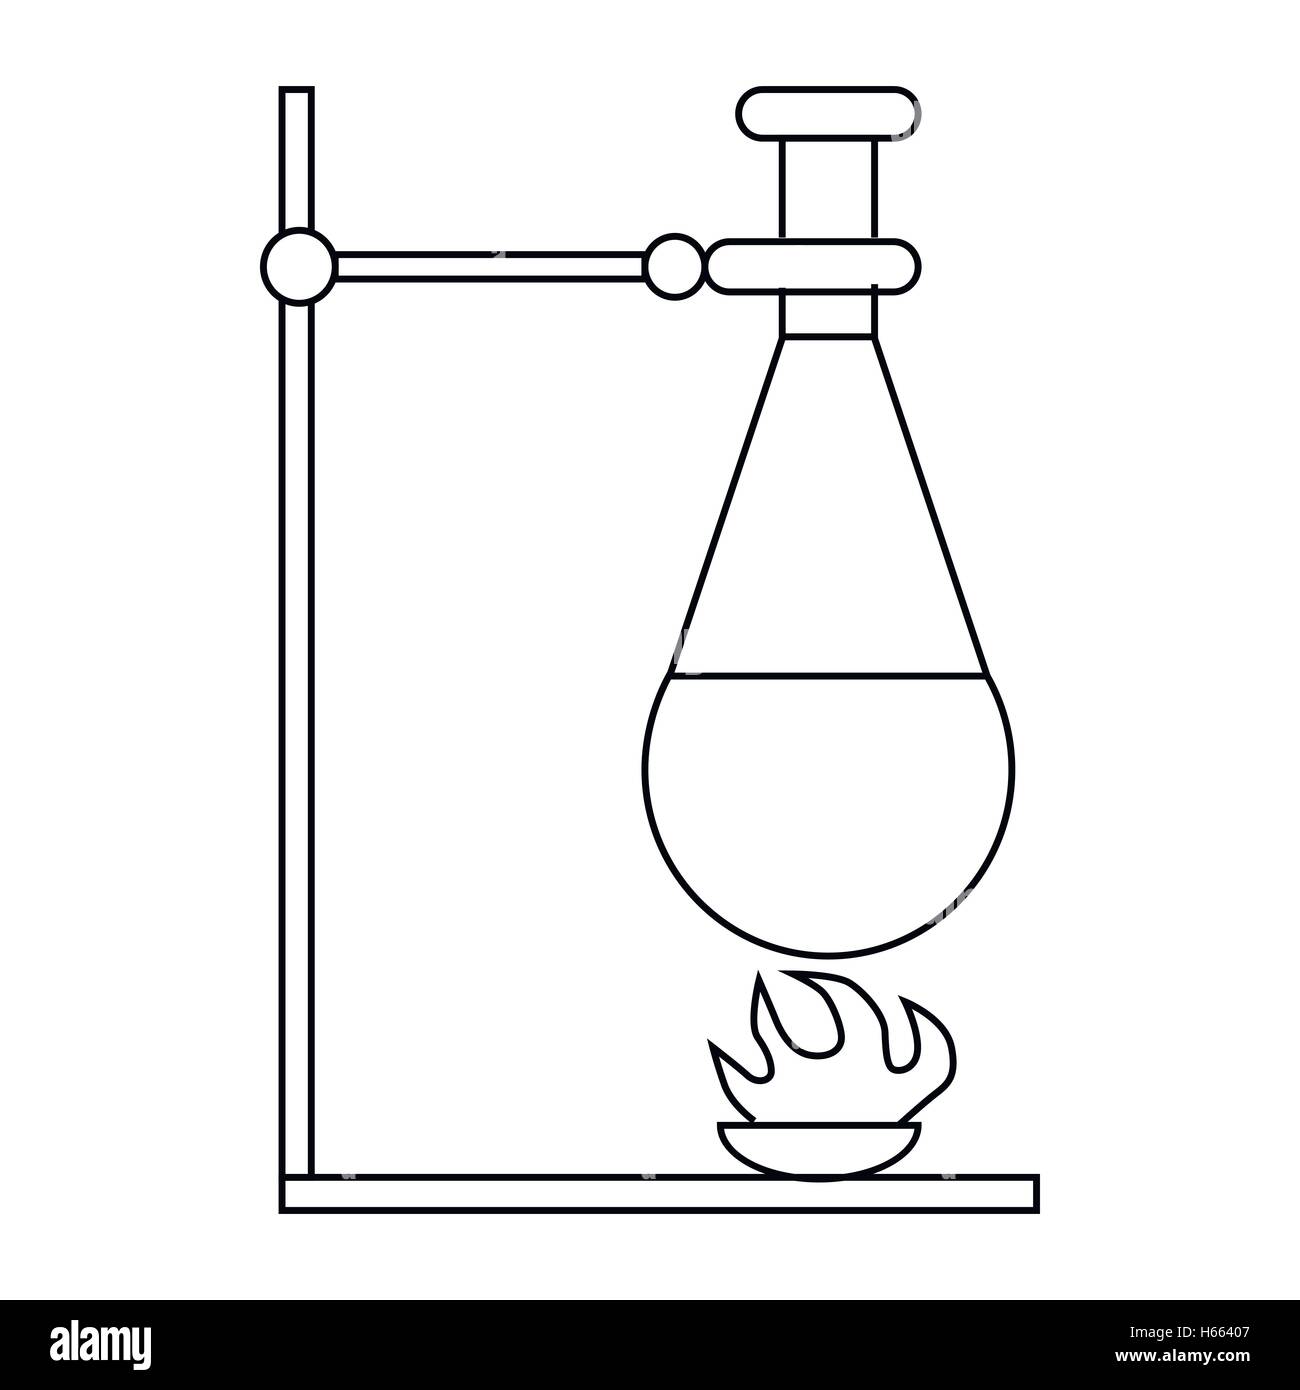 Retort stand, bunsen burner and test flask icon Stock Vector